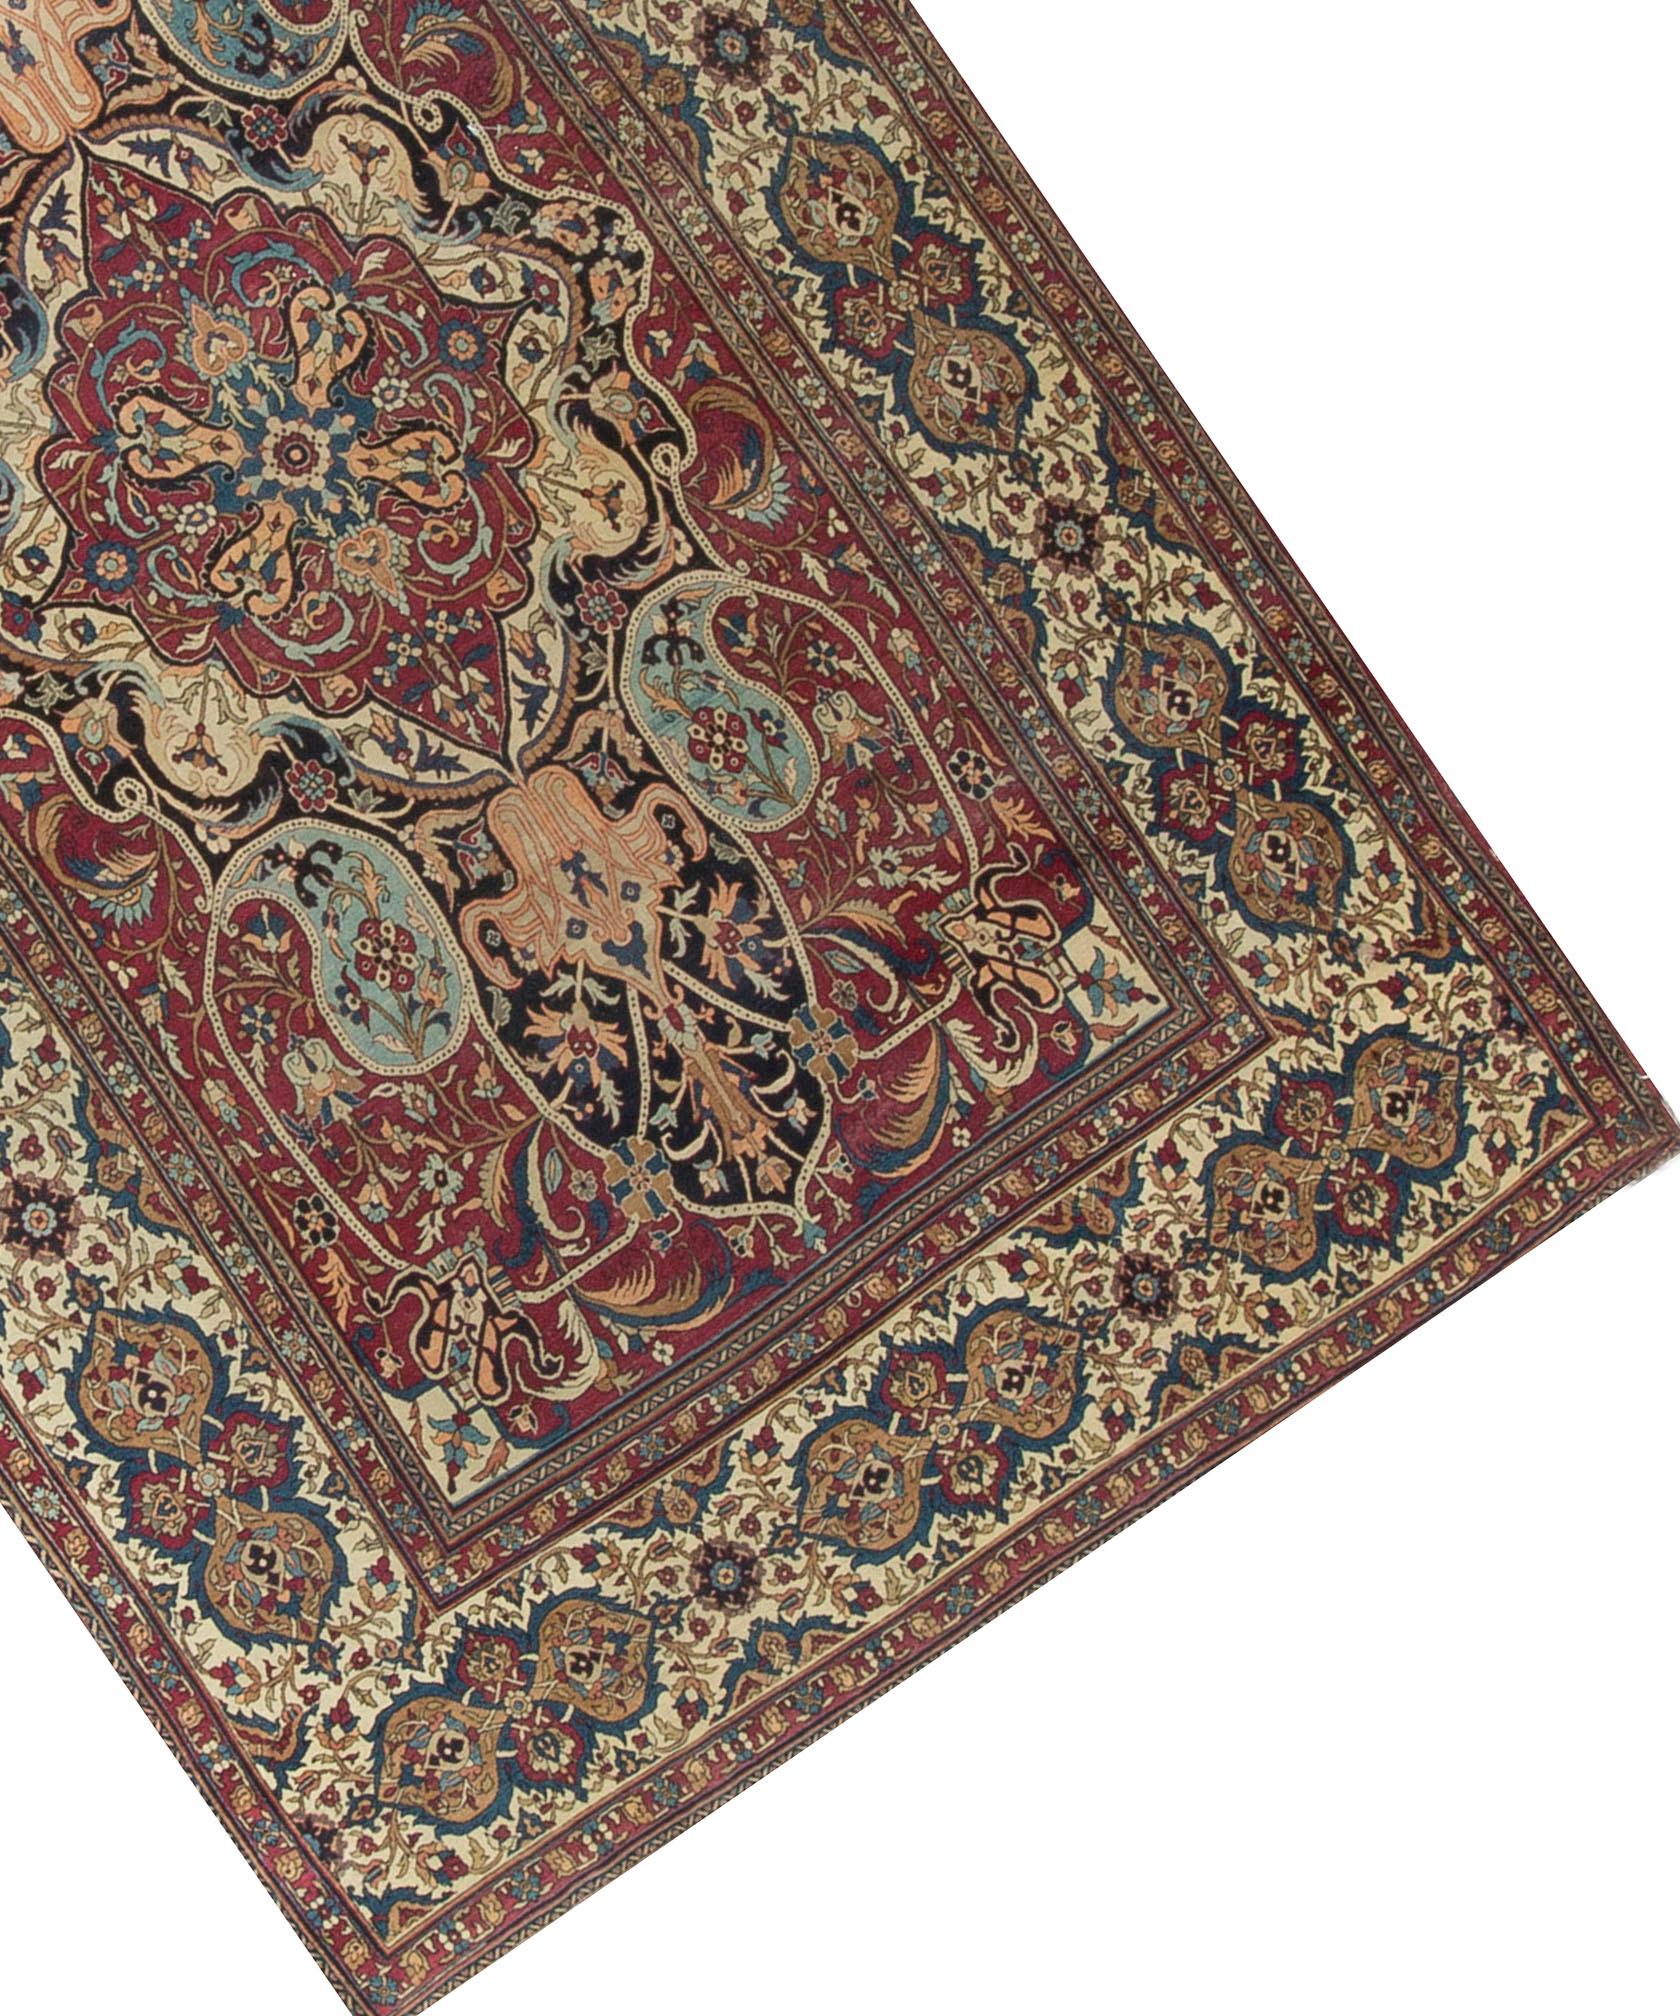 Some of the finest rugs in the world come from the famous weaving area known as Lavar or Ravar. Situated around 60 miles north of Kirman they have been weaving rugs of exceptional quality for over 200 years. This particular example displays all the